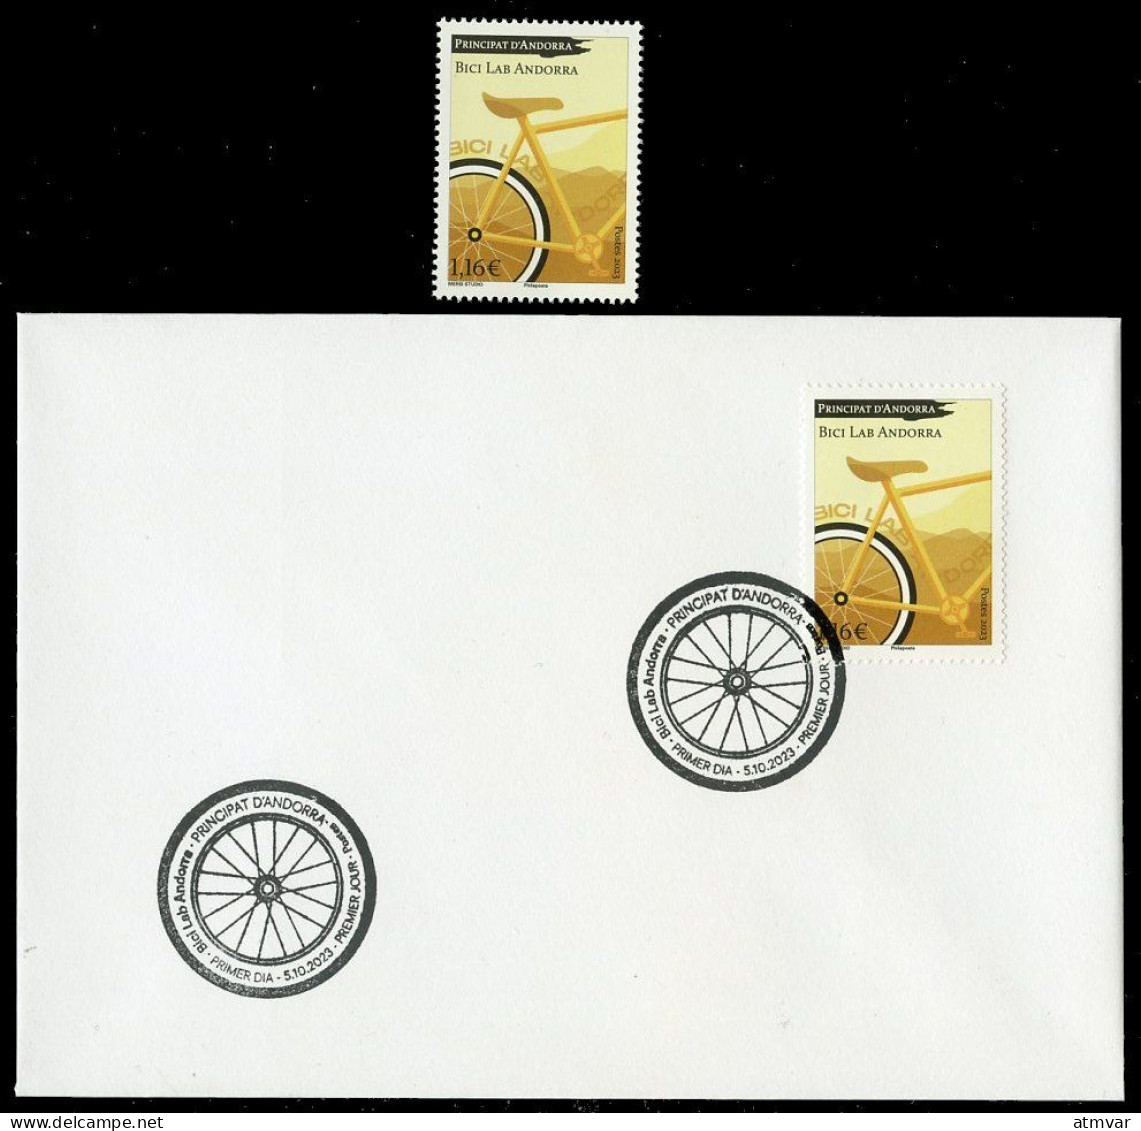 ANDORRA Postes (2023) Bici Lab Andorra, Bicicleta, Bicyclette, Bicycle, Fahrrad, Fiets - First Day Cover + Stamp - Collections